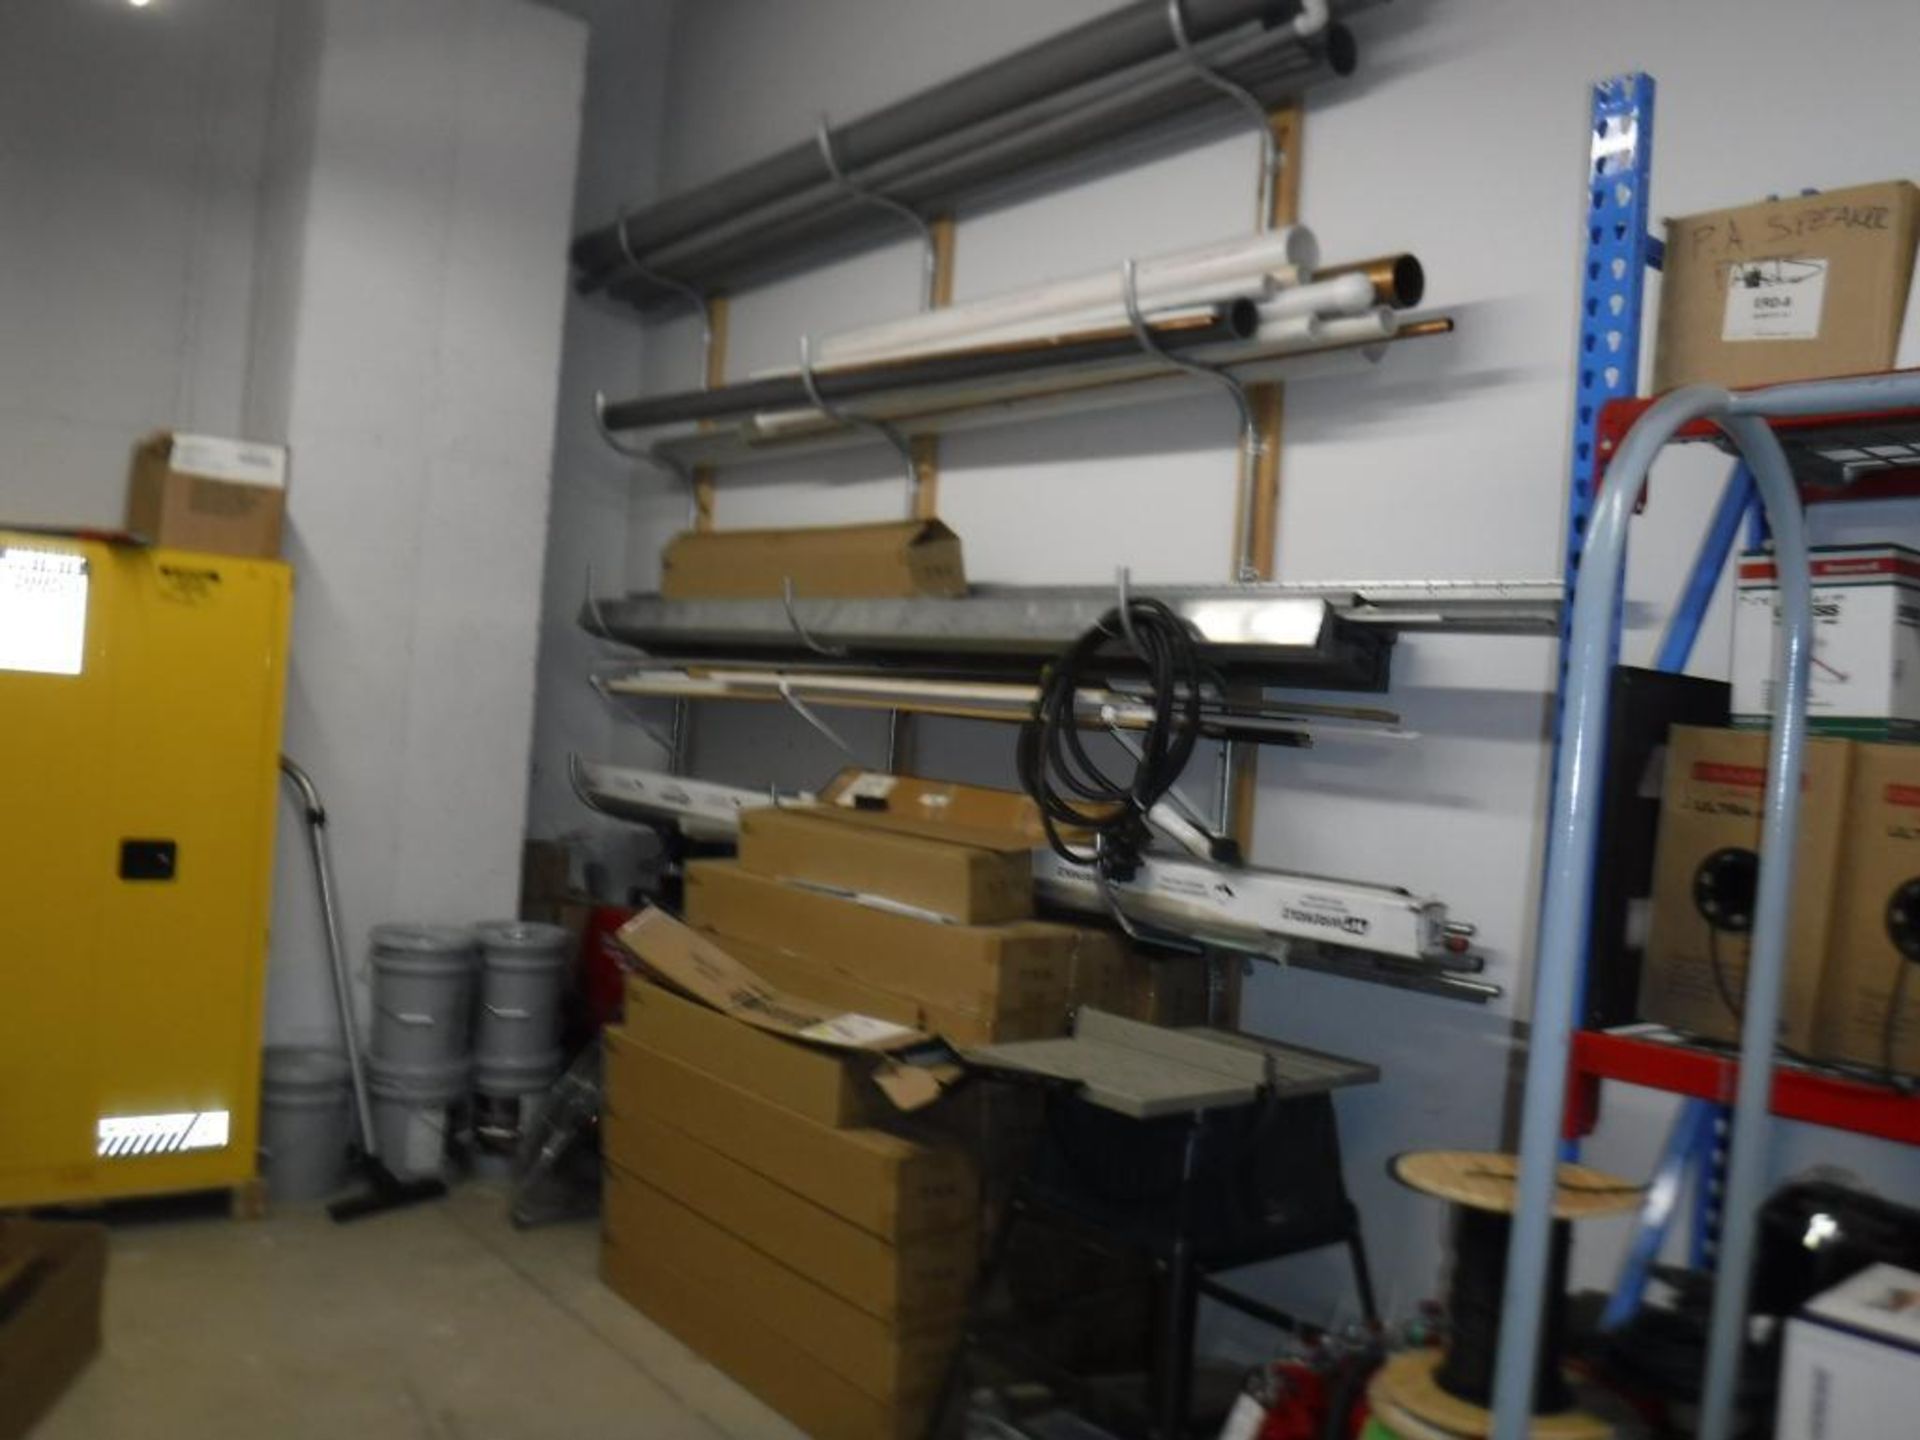 Lot c/o: Building Storage Room (NO AIR FILTERS OR REGISTERS) Contents to Include-Like New Lincon Wel - Image 8 of 13